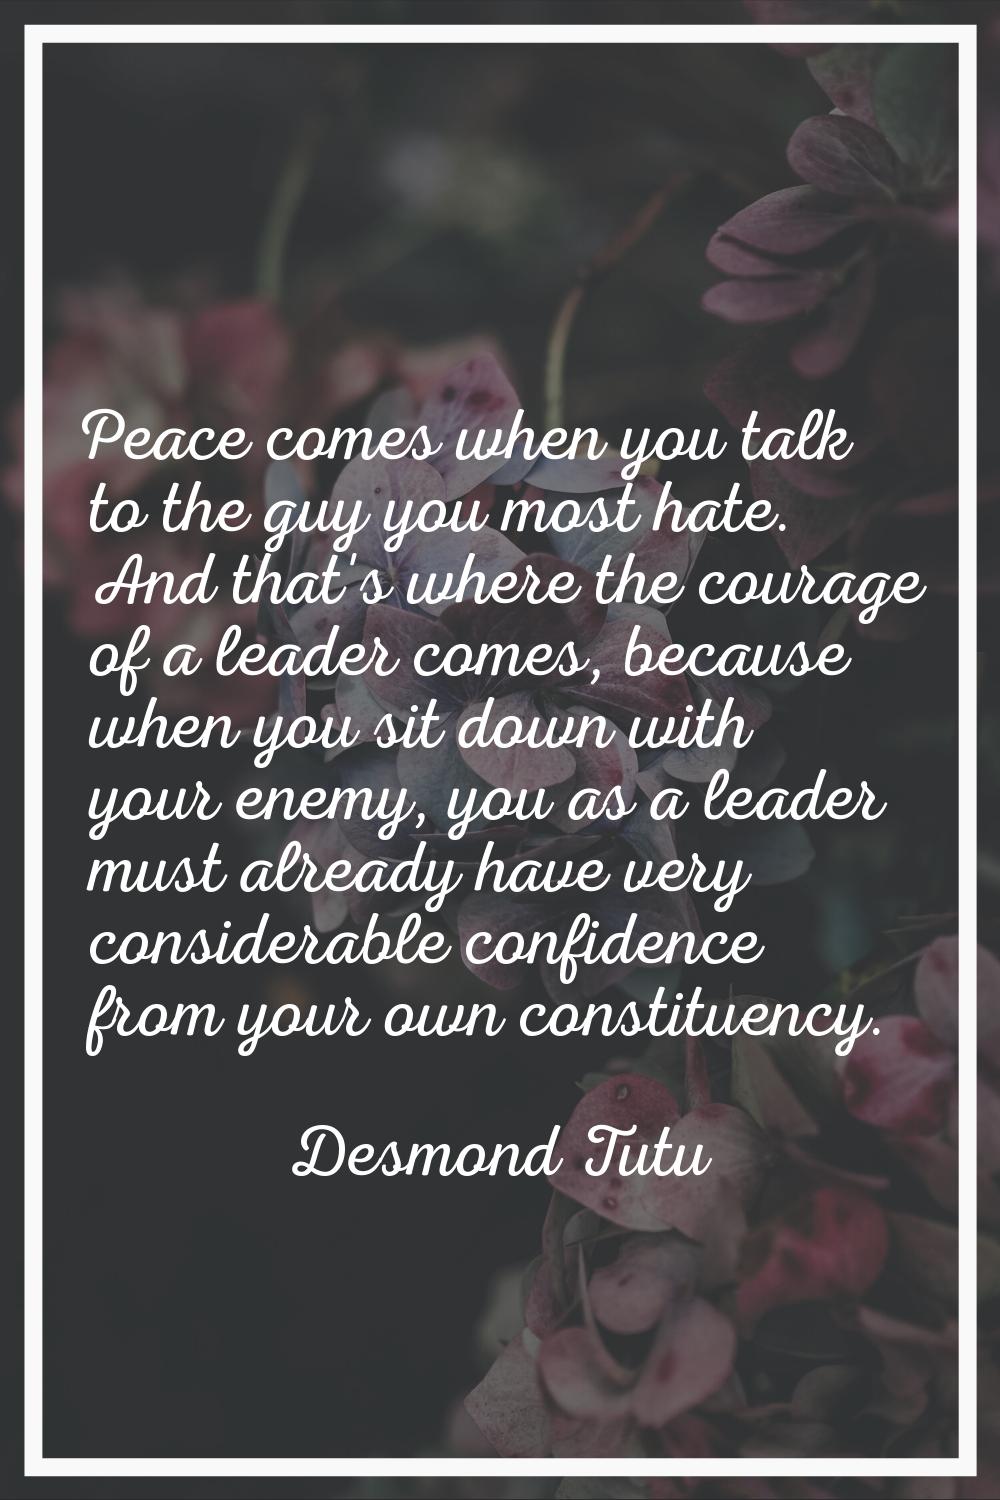 Peace comes when you talk to the guy you most hate. And that's where the courage of a leader comes,